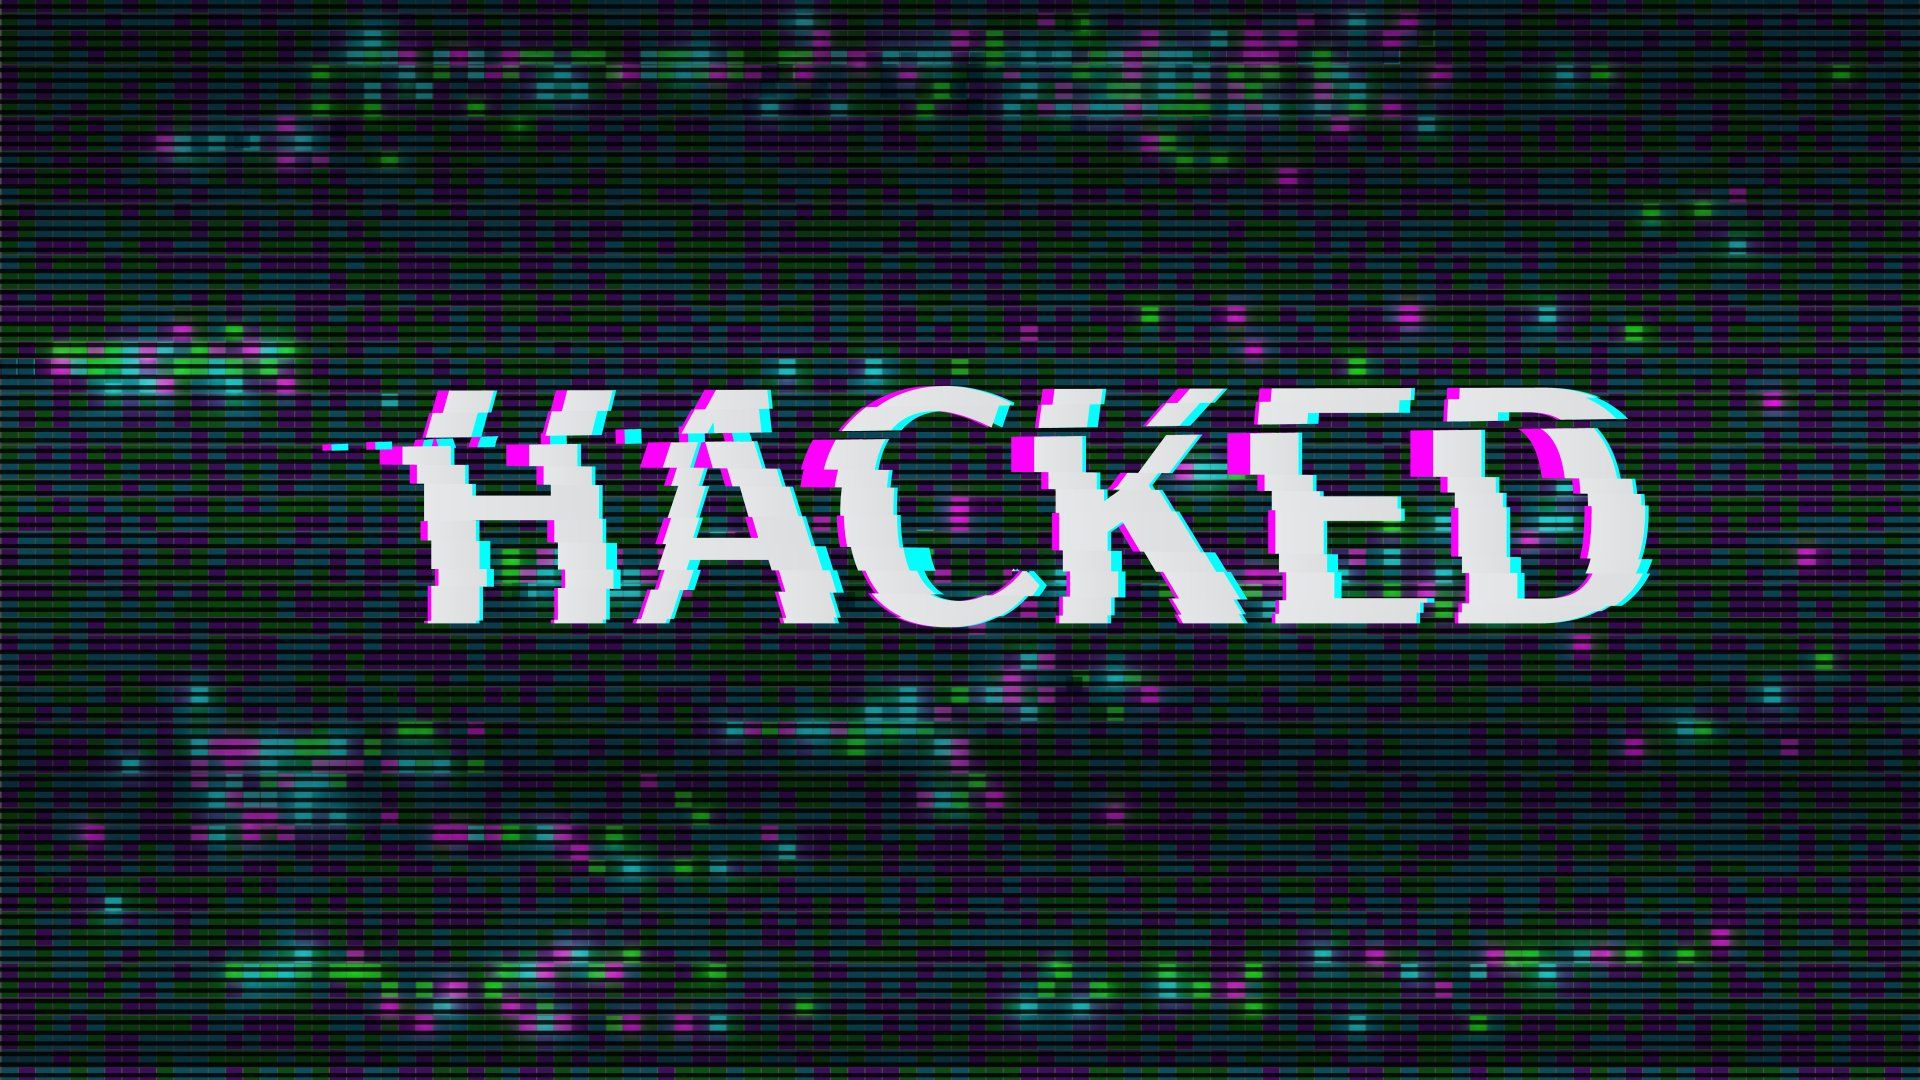 yet another hacked wordpress site